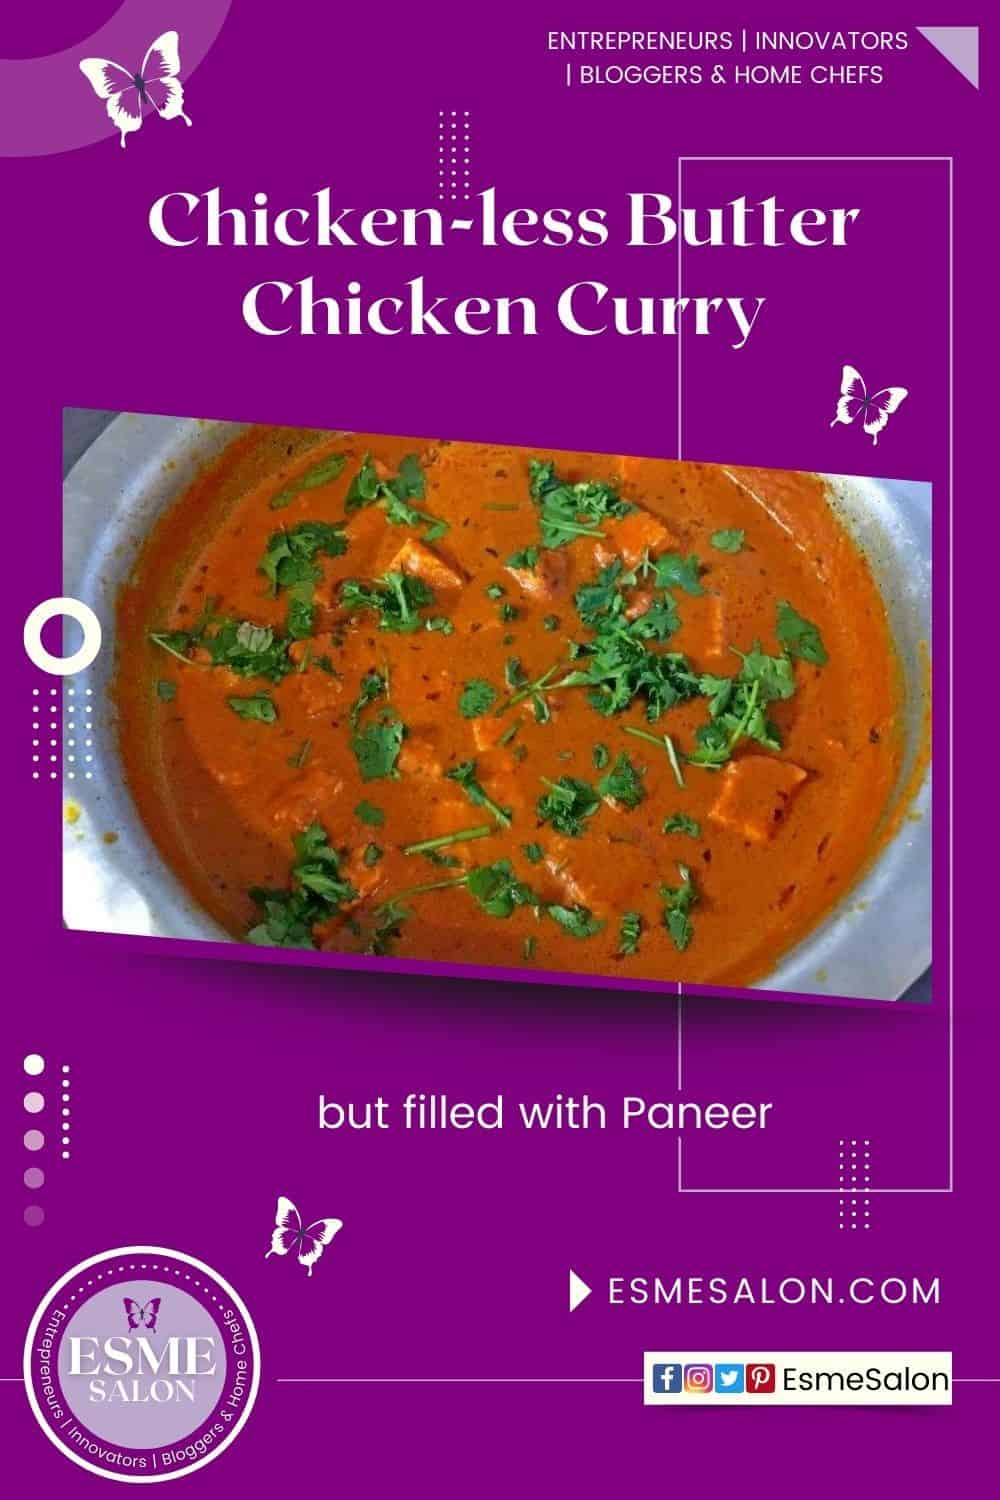 An image of a enamel dish filled with Chicken-less Butter Chicken Curry